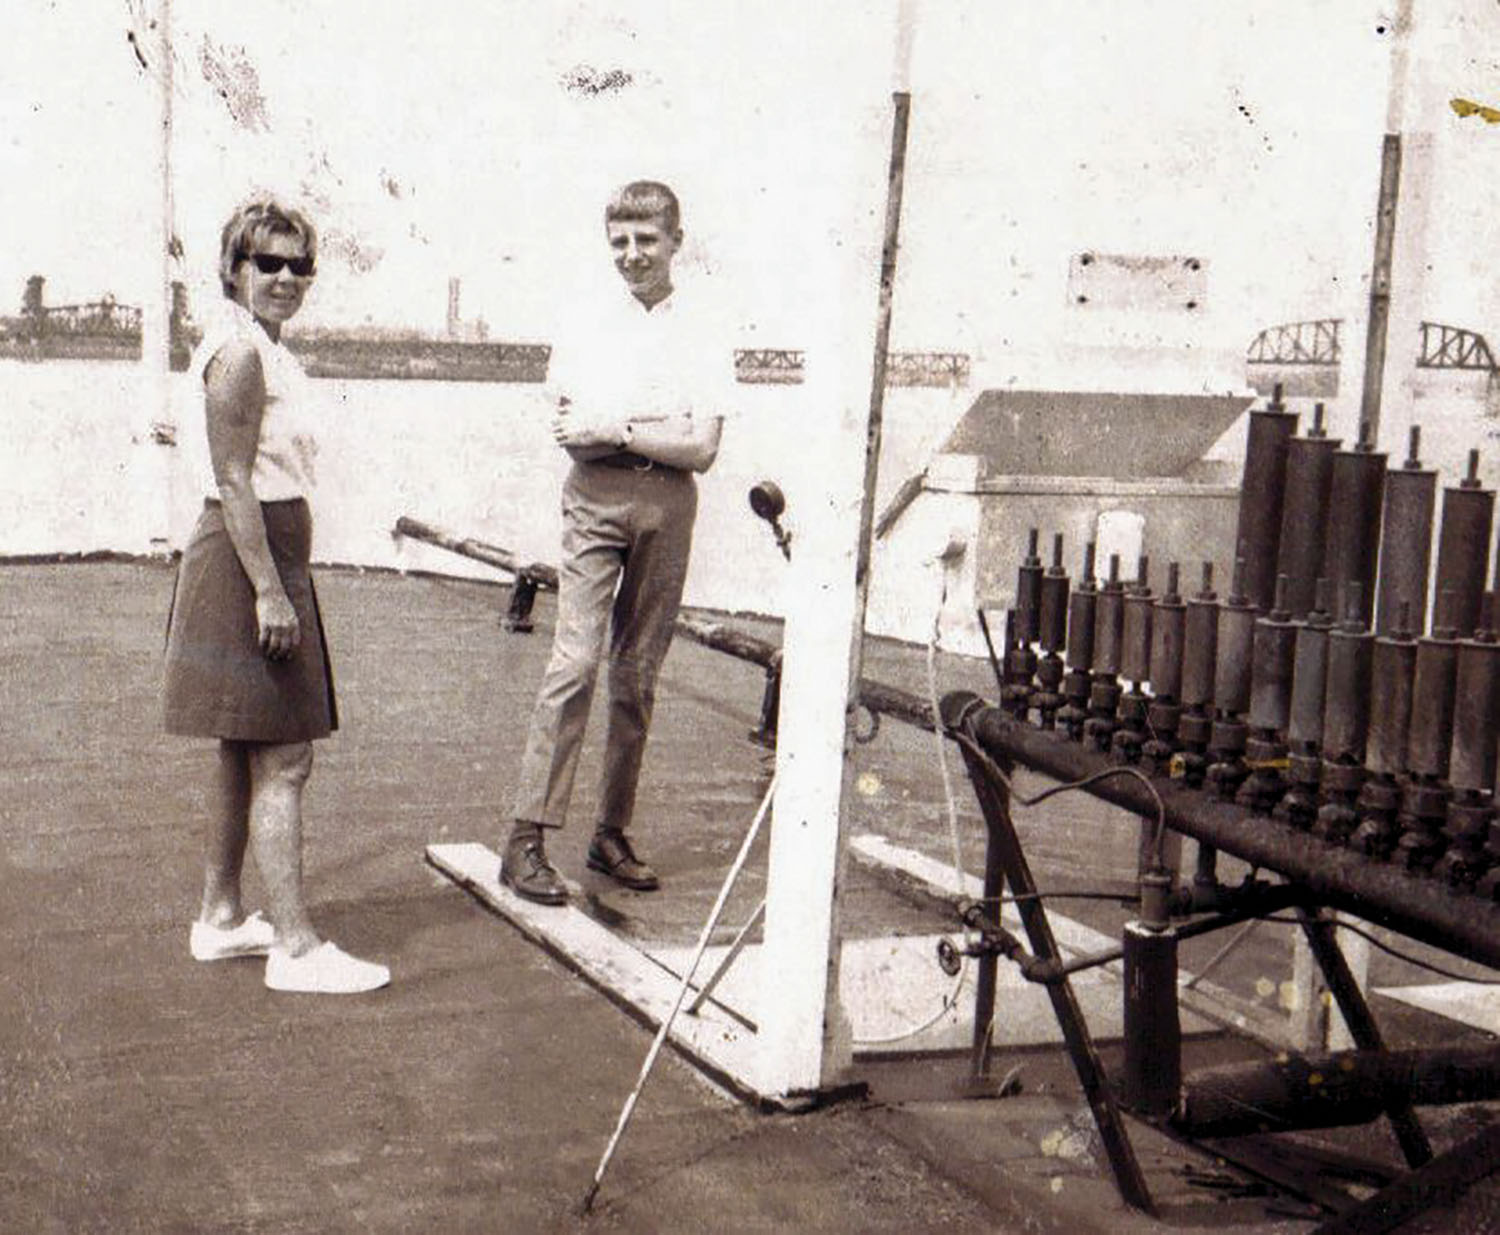 Teacher and student: Calliopist Shirley Burwinkle and Keith Norrington aboard the Str. Belle of Louisville in 1969. (Keith Norrington collection)